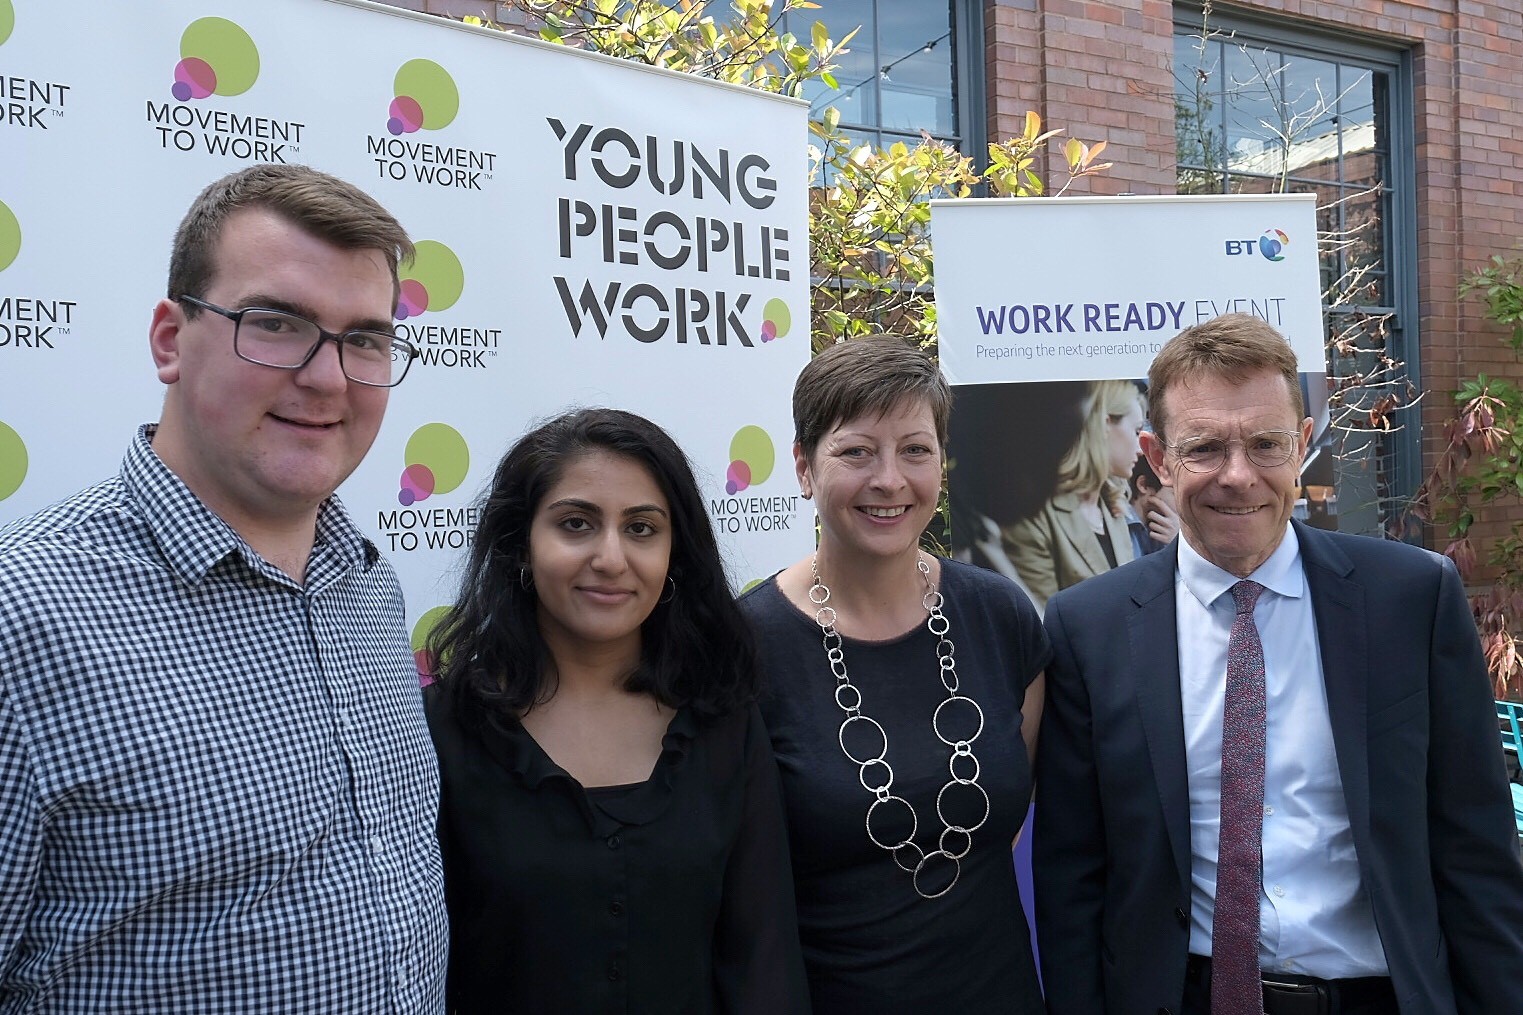 Work placement graduates James Lovell, 23, and Balkirit Poonia, 21, with Liz Williams, director of digital society at BT, and Mayor of the West Midlands, Andy Street